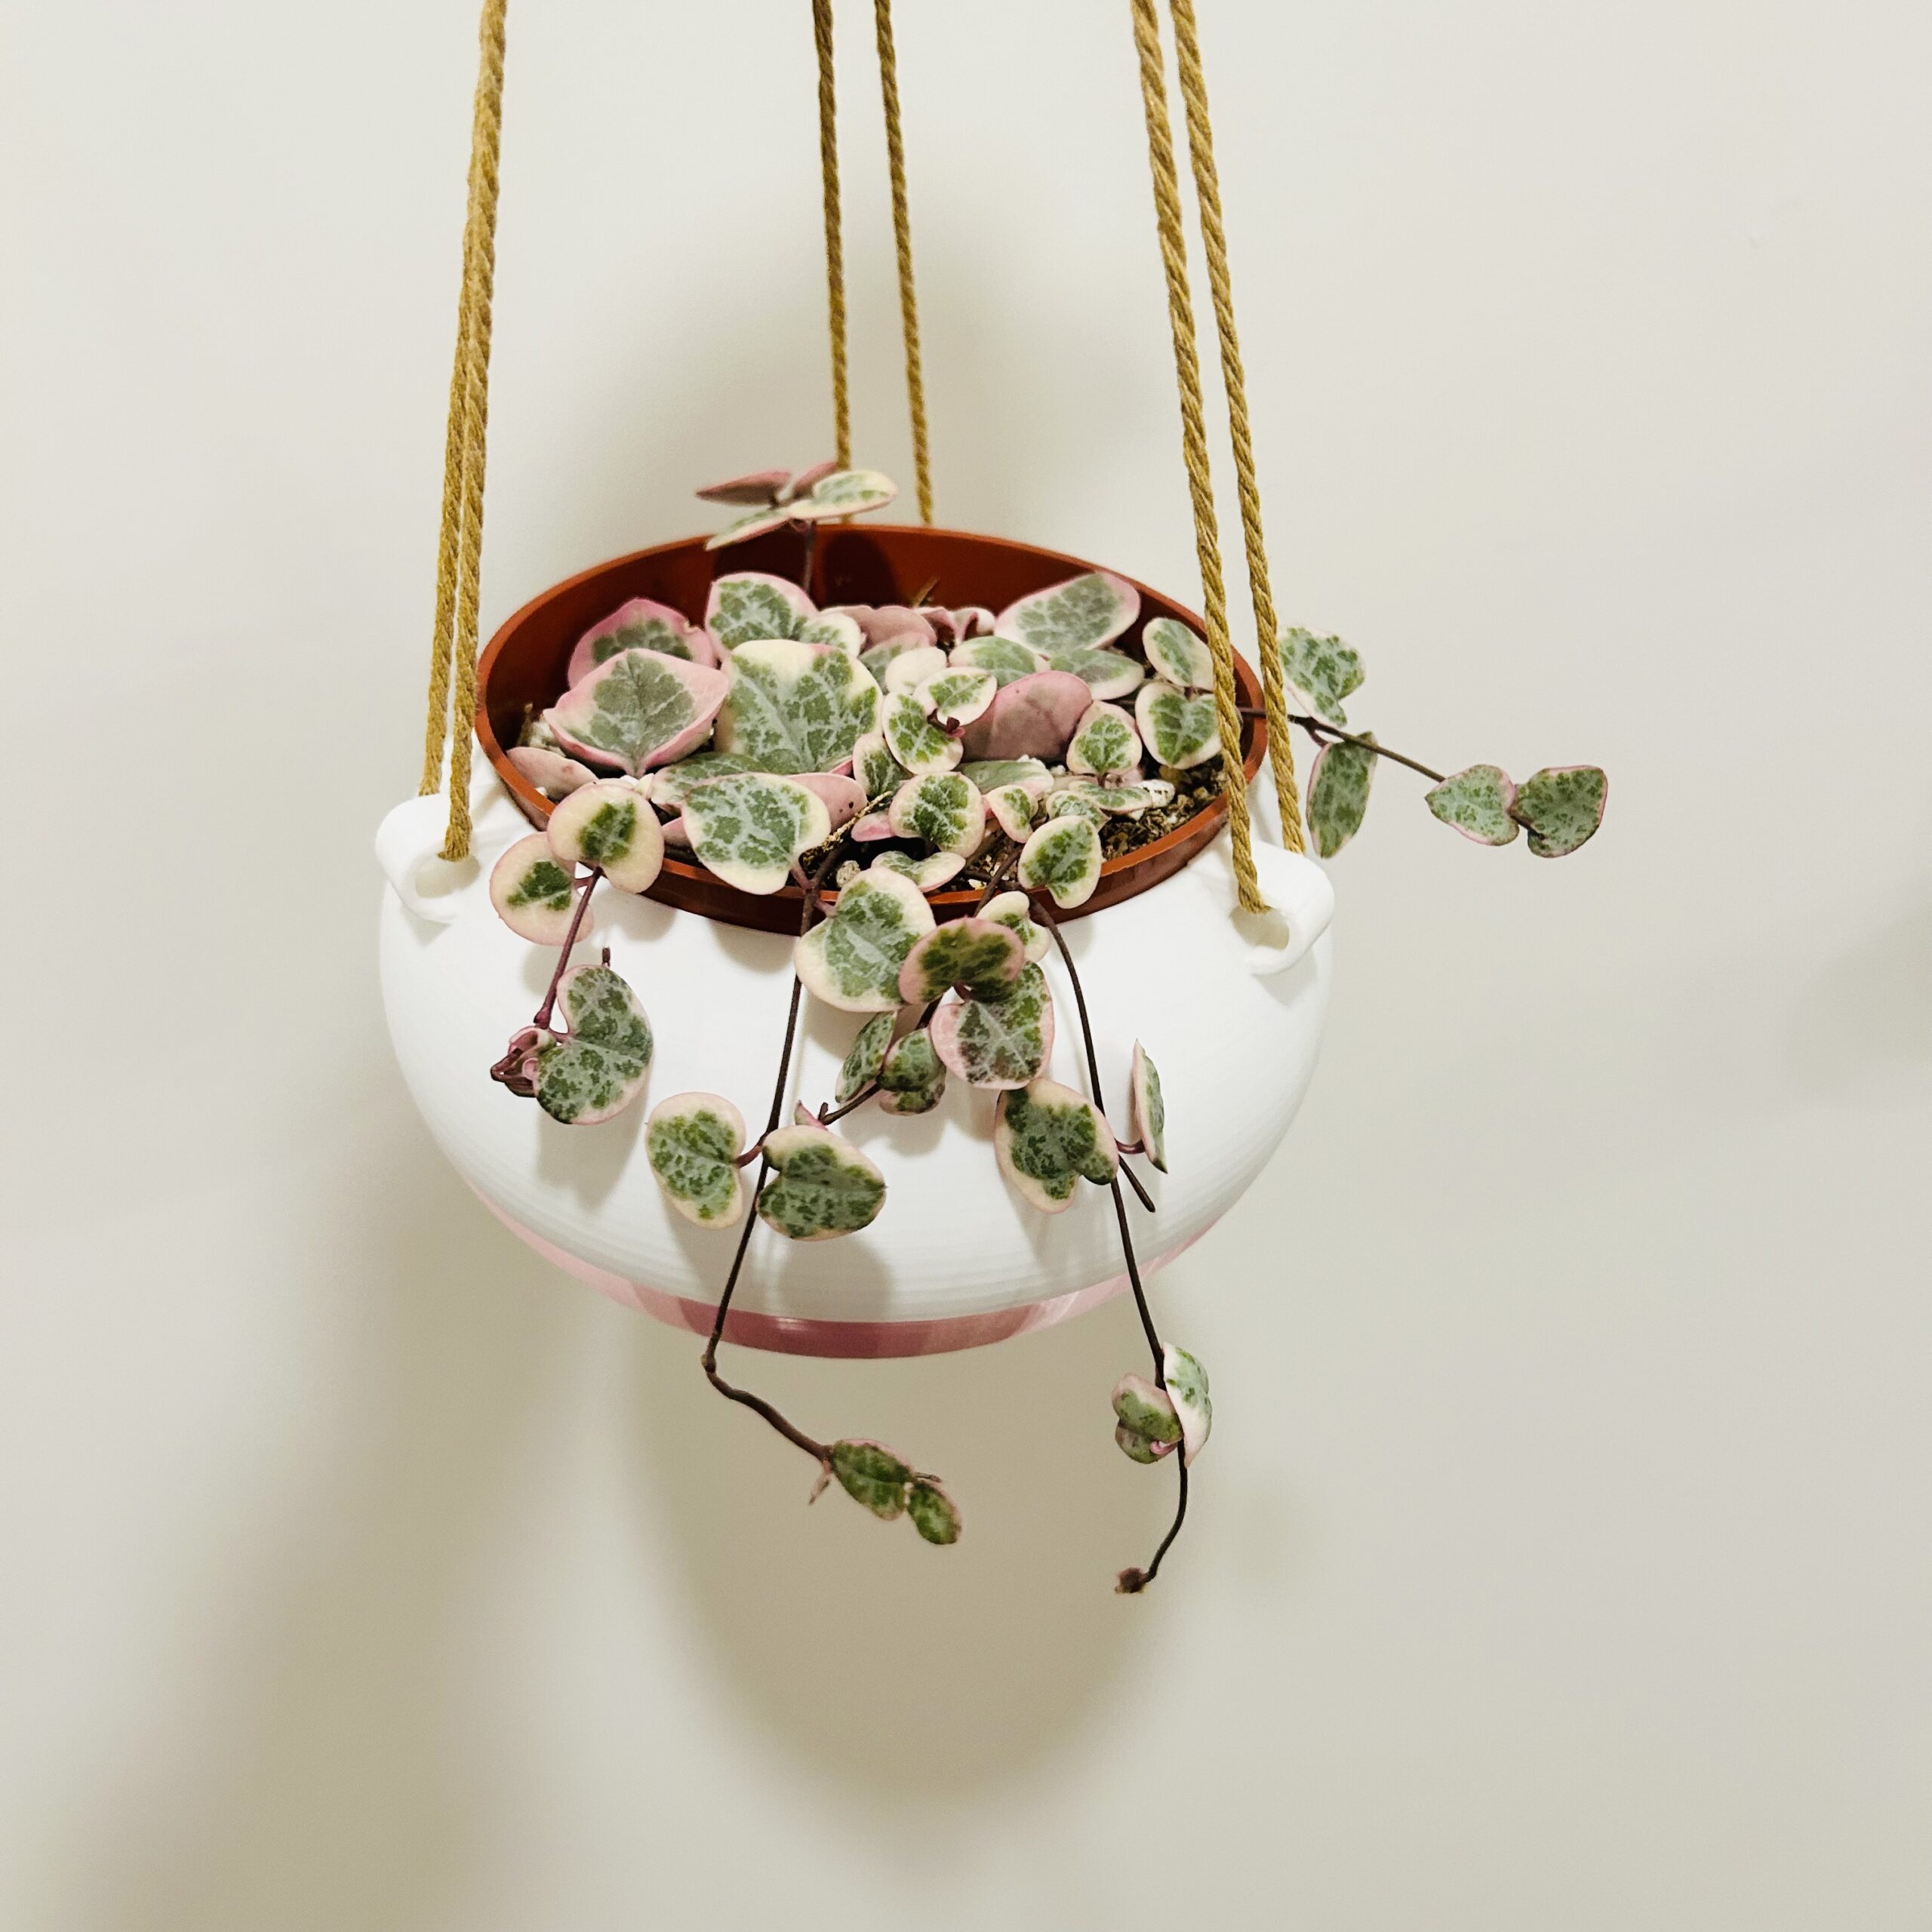 A Hanging Planter for Variegated String of Hearts